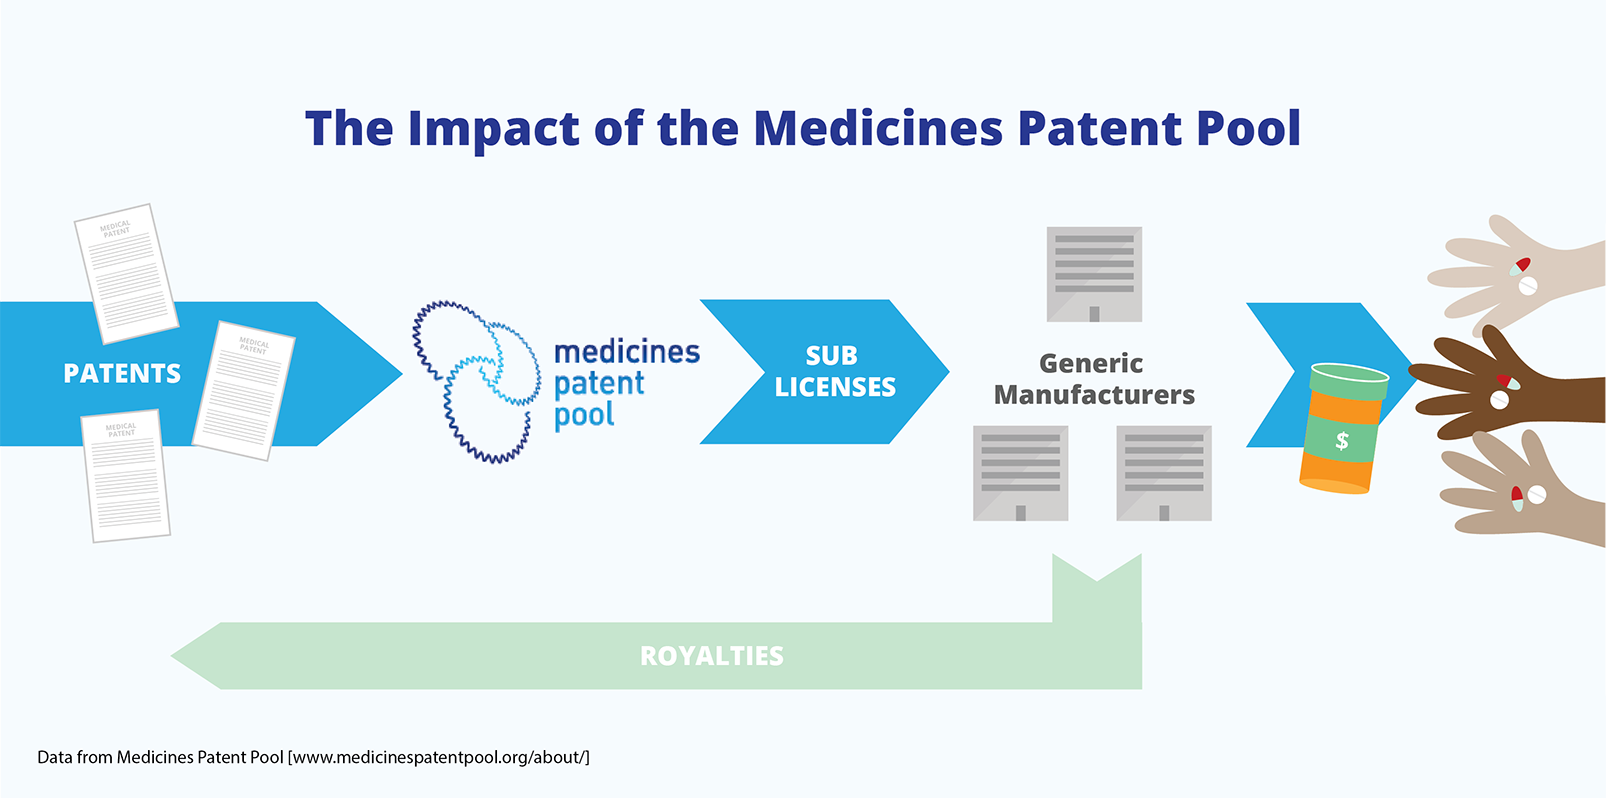 The impact of medicines by patent pool.